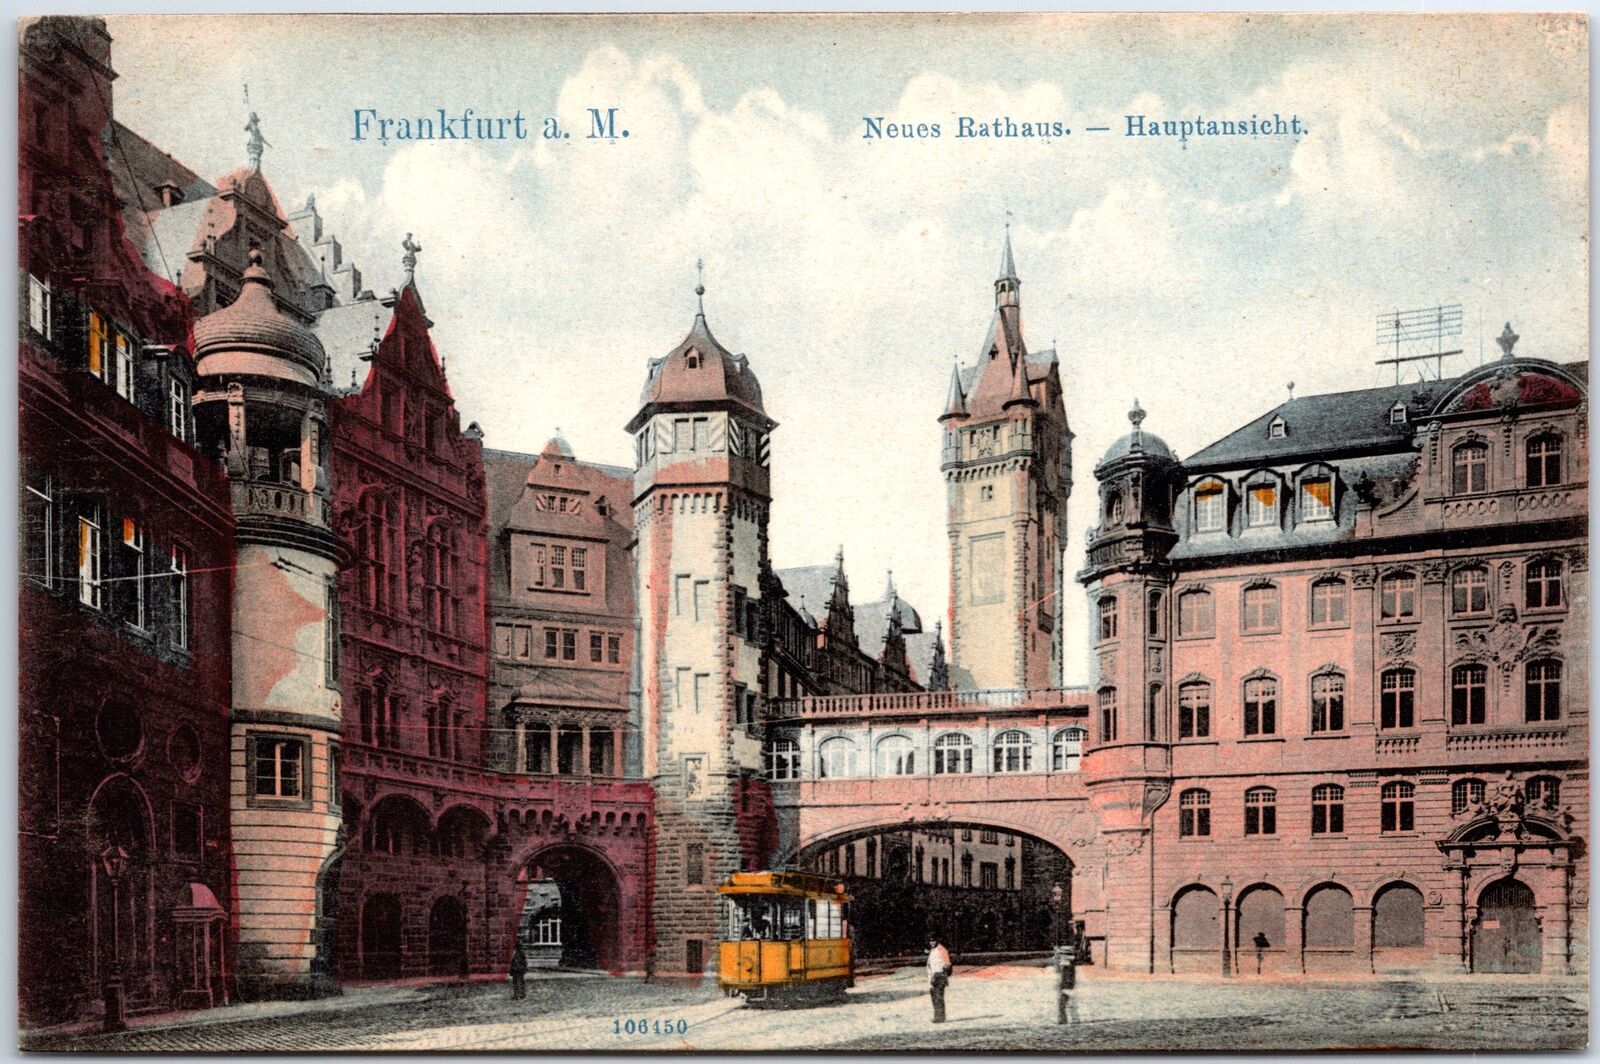 VINTAGE POSTCARD THE NEW CITY HALL AND TRAIN TROLLEY AT FRANKFURT GERMANY c.1910